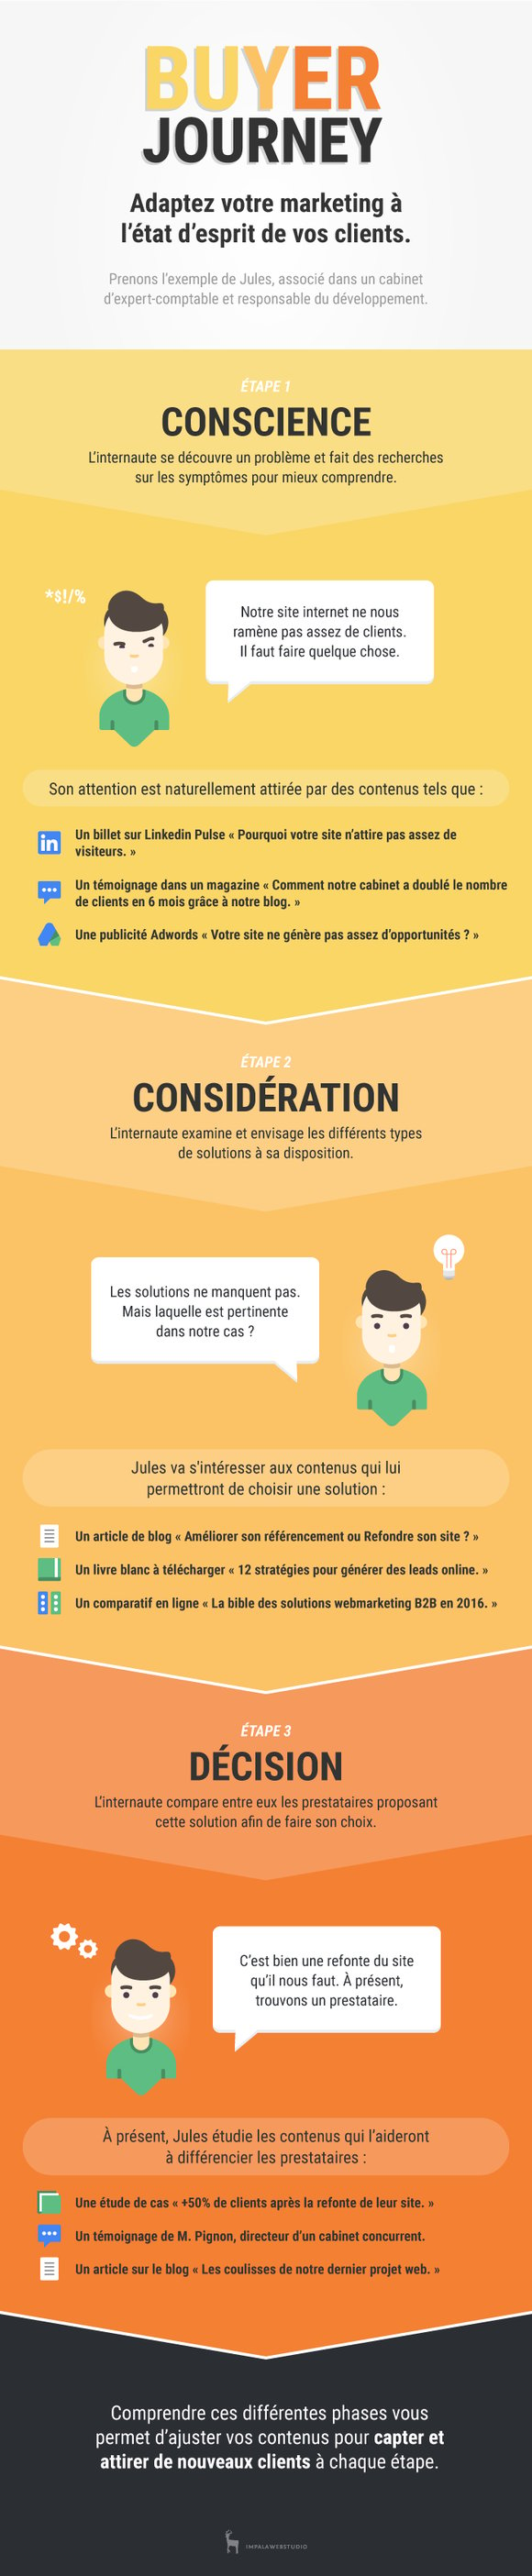 IWS_infographie-buyer-journey_01.png